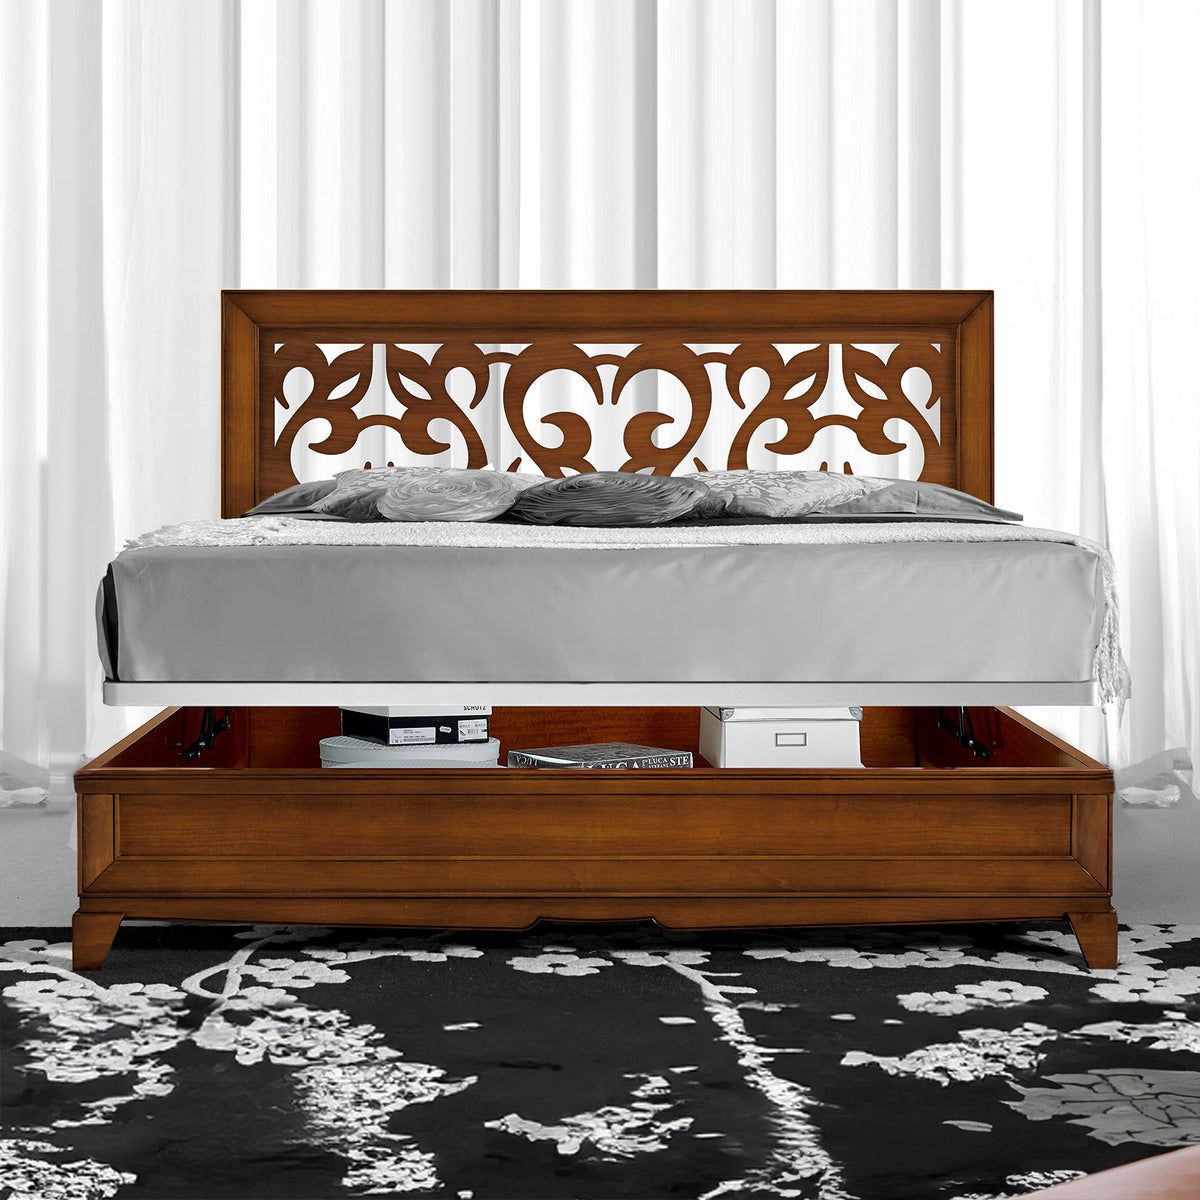 Classic KING SIZE Double Bed in Wood with Storage Box Perforated Headboard L 194 D 211 cm Arte D'Este Piombini Collection